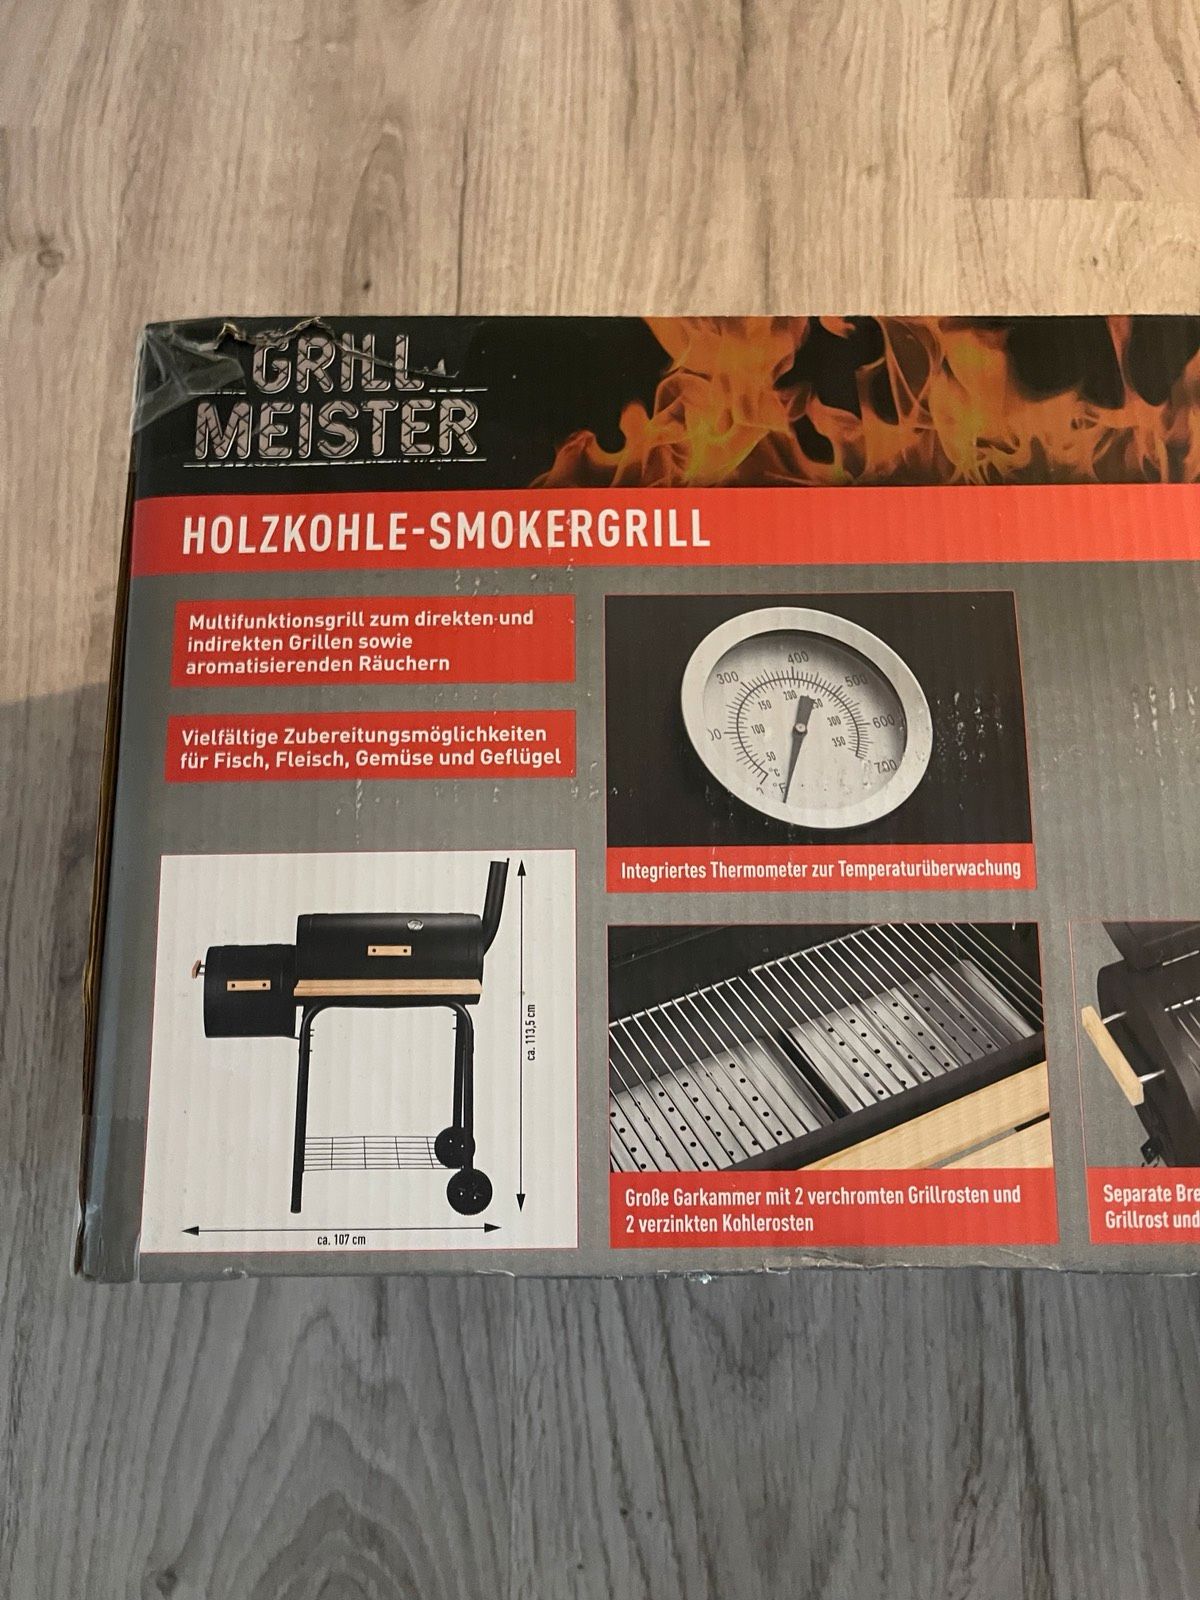 GRILLMEISTER Holzkohle-Smokergrill »GMS 92 A1« Test